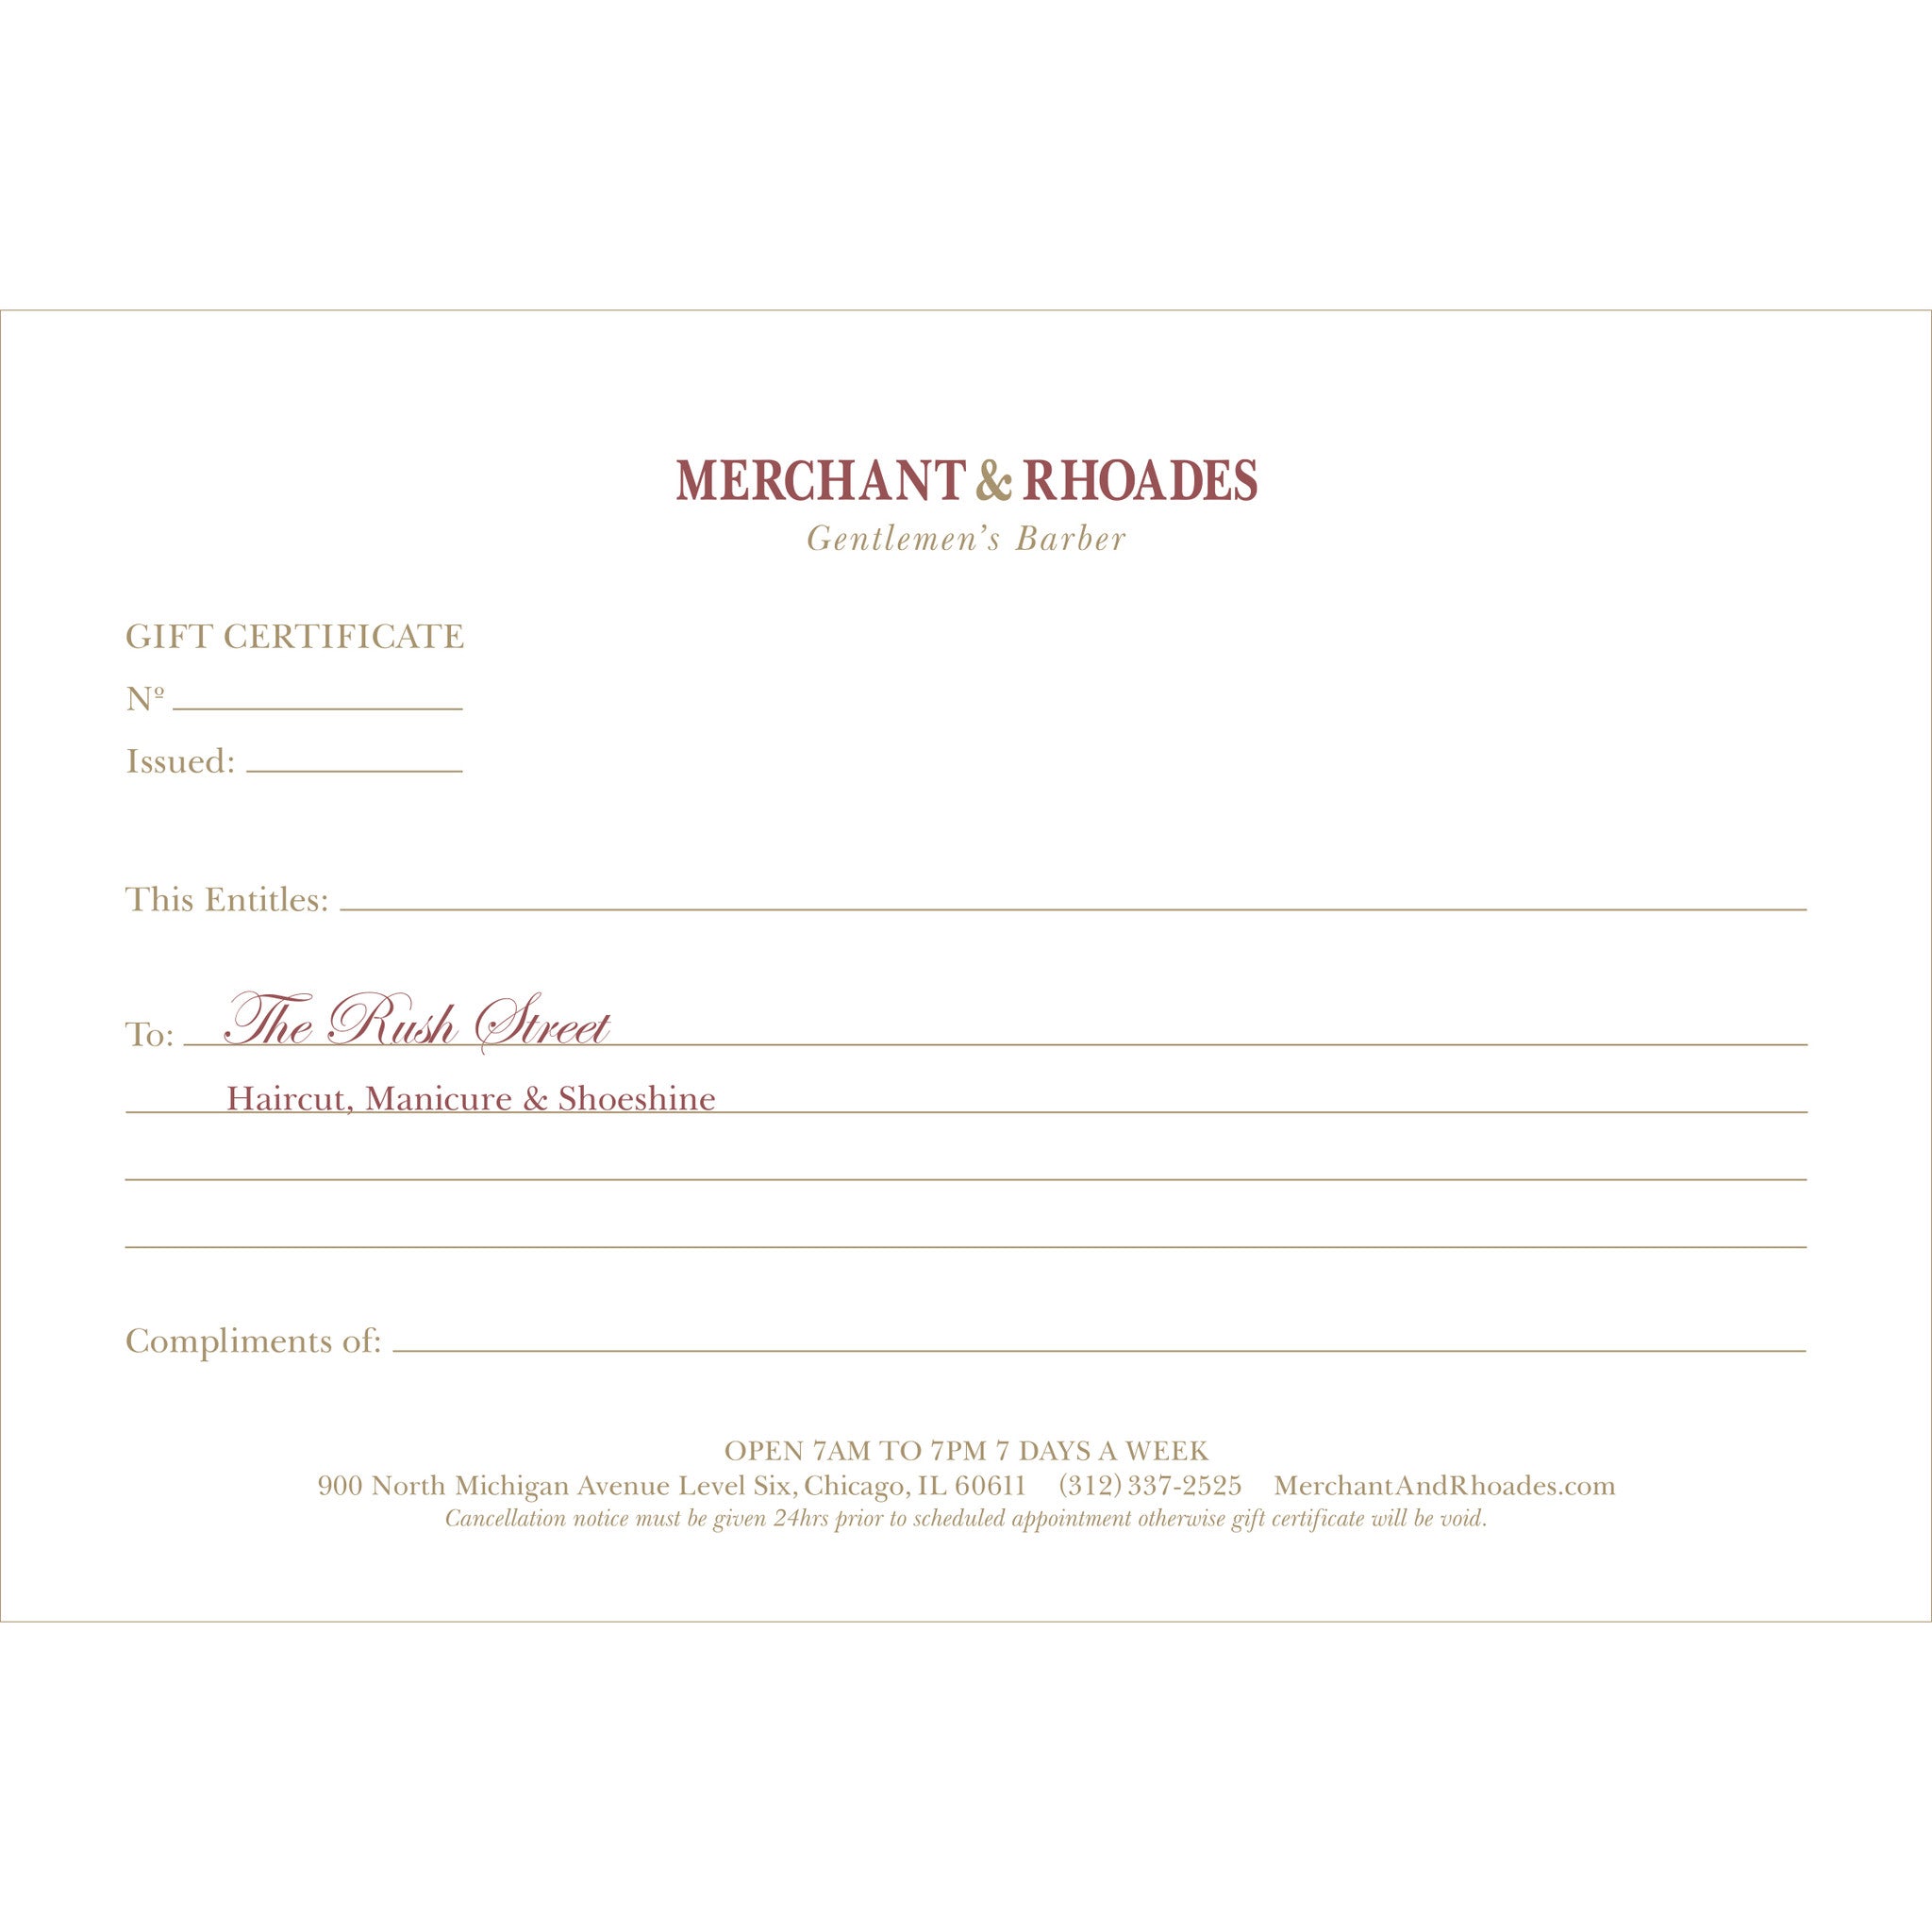 Merchant & Rhoades Gift Certificate (IN-STORE ONLY) - "The Rush Street" Package